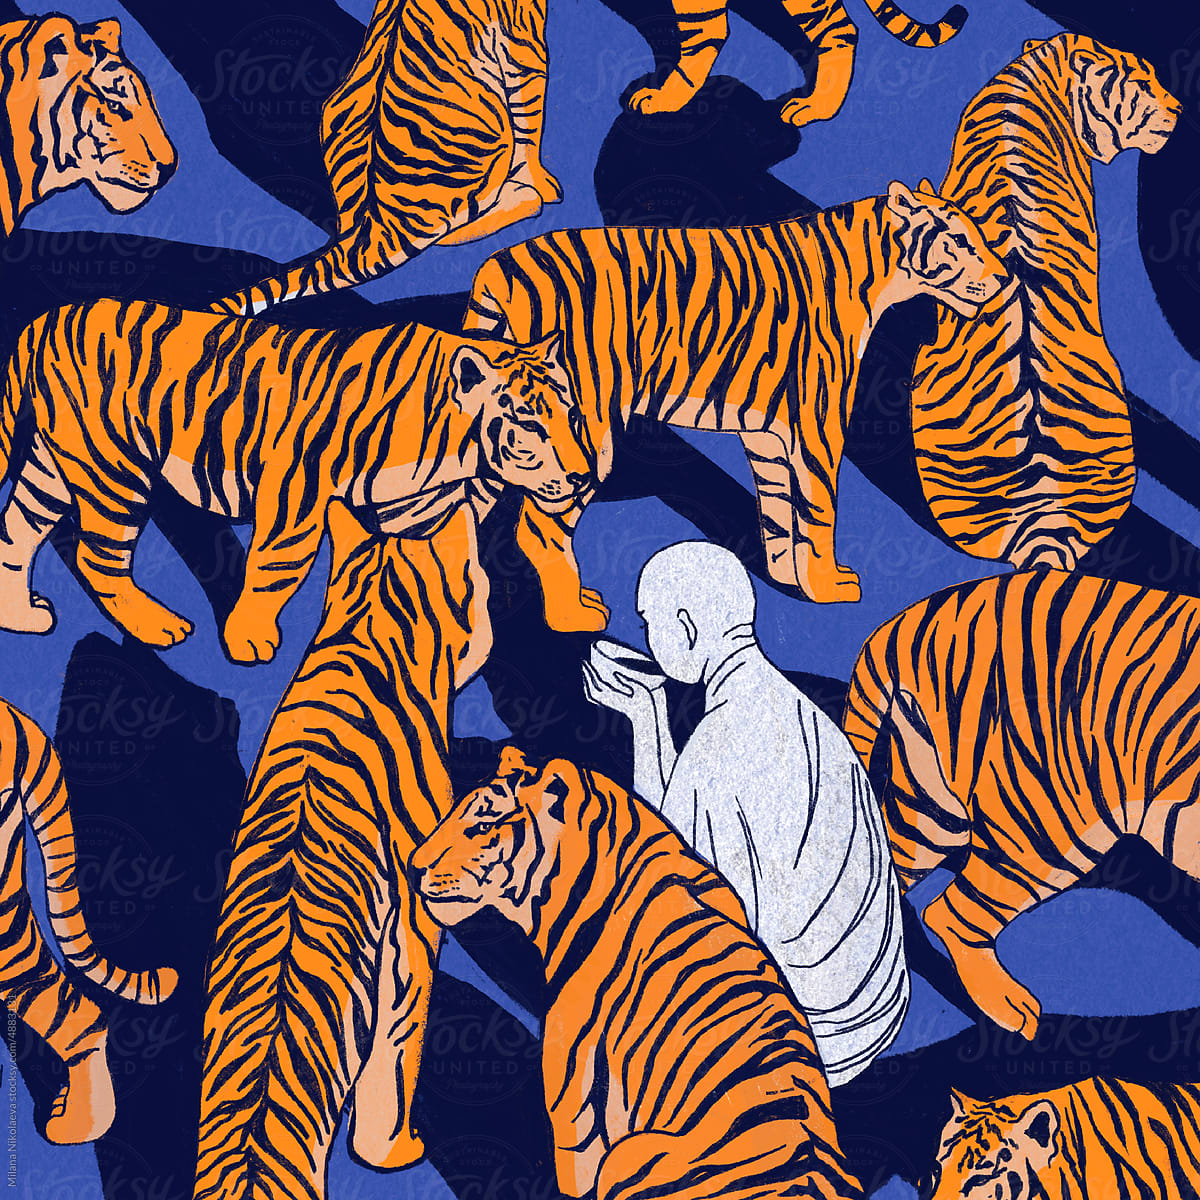 Zen calmness illustration concept. Monk surrounded by tigers